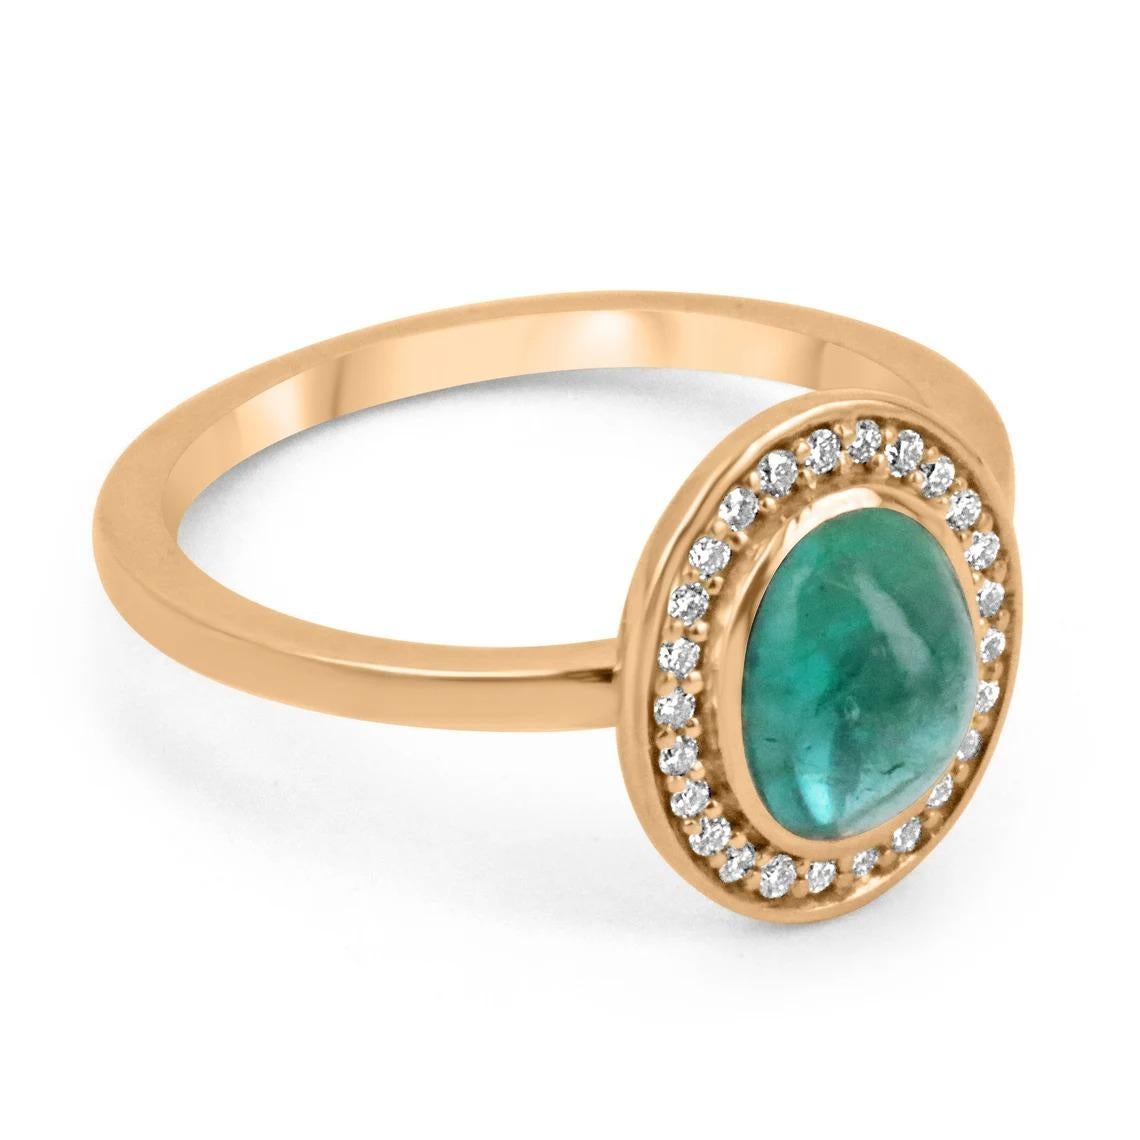 A beautiful, emerald cabochon and diamond accent ring. The center gemstone features a lovely 1.30-carat, natural emerald cabochon cut in an oval shape. Carefully bezel set, with pave set diamonds creating a gorgeous halo. Crafted in gleaming 14K